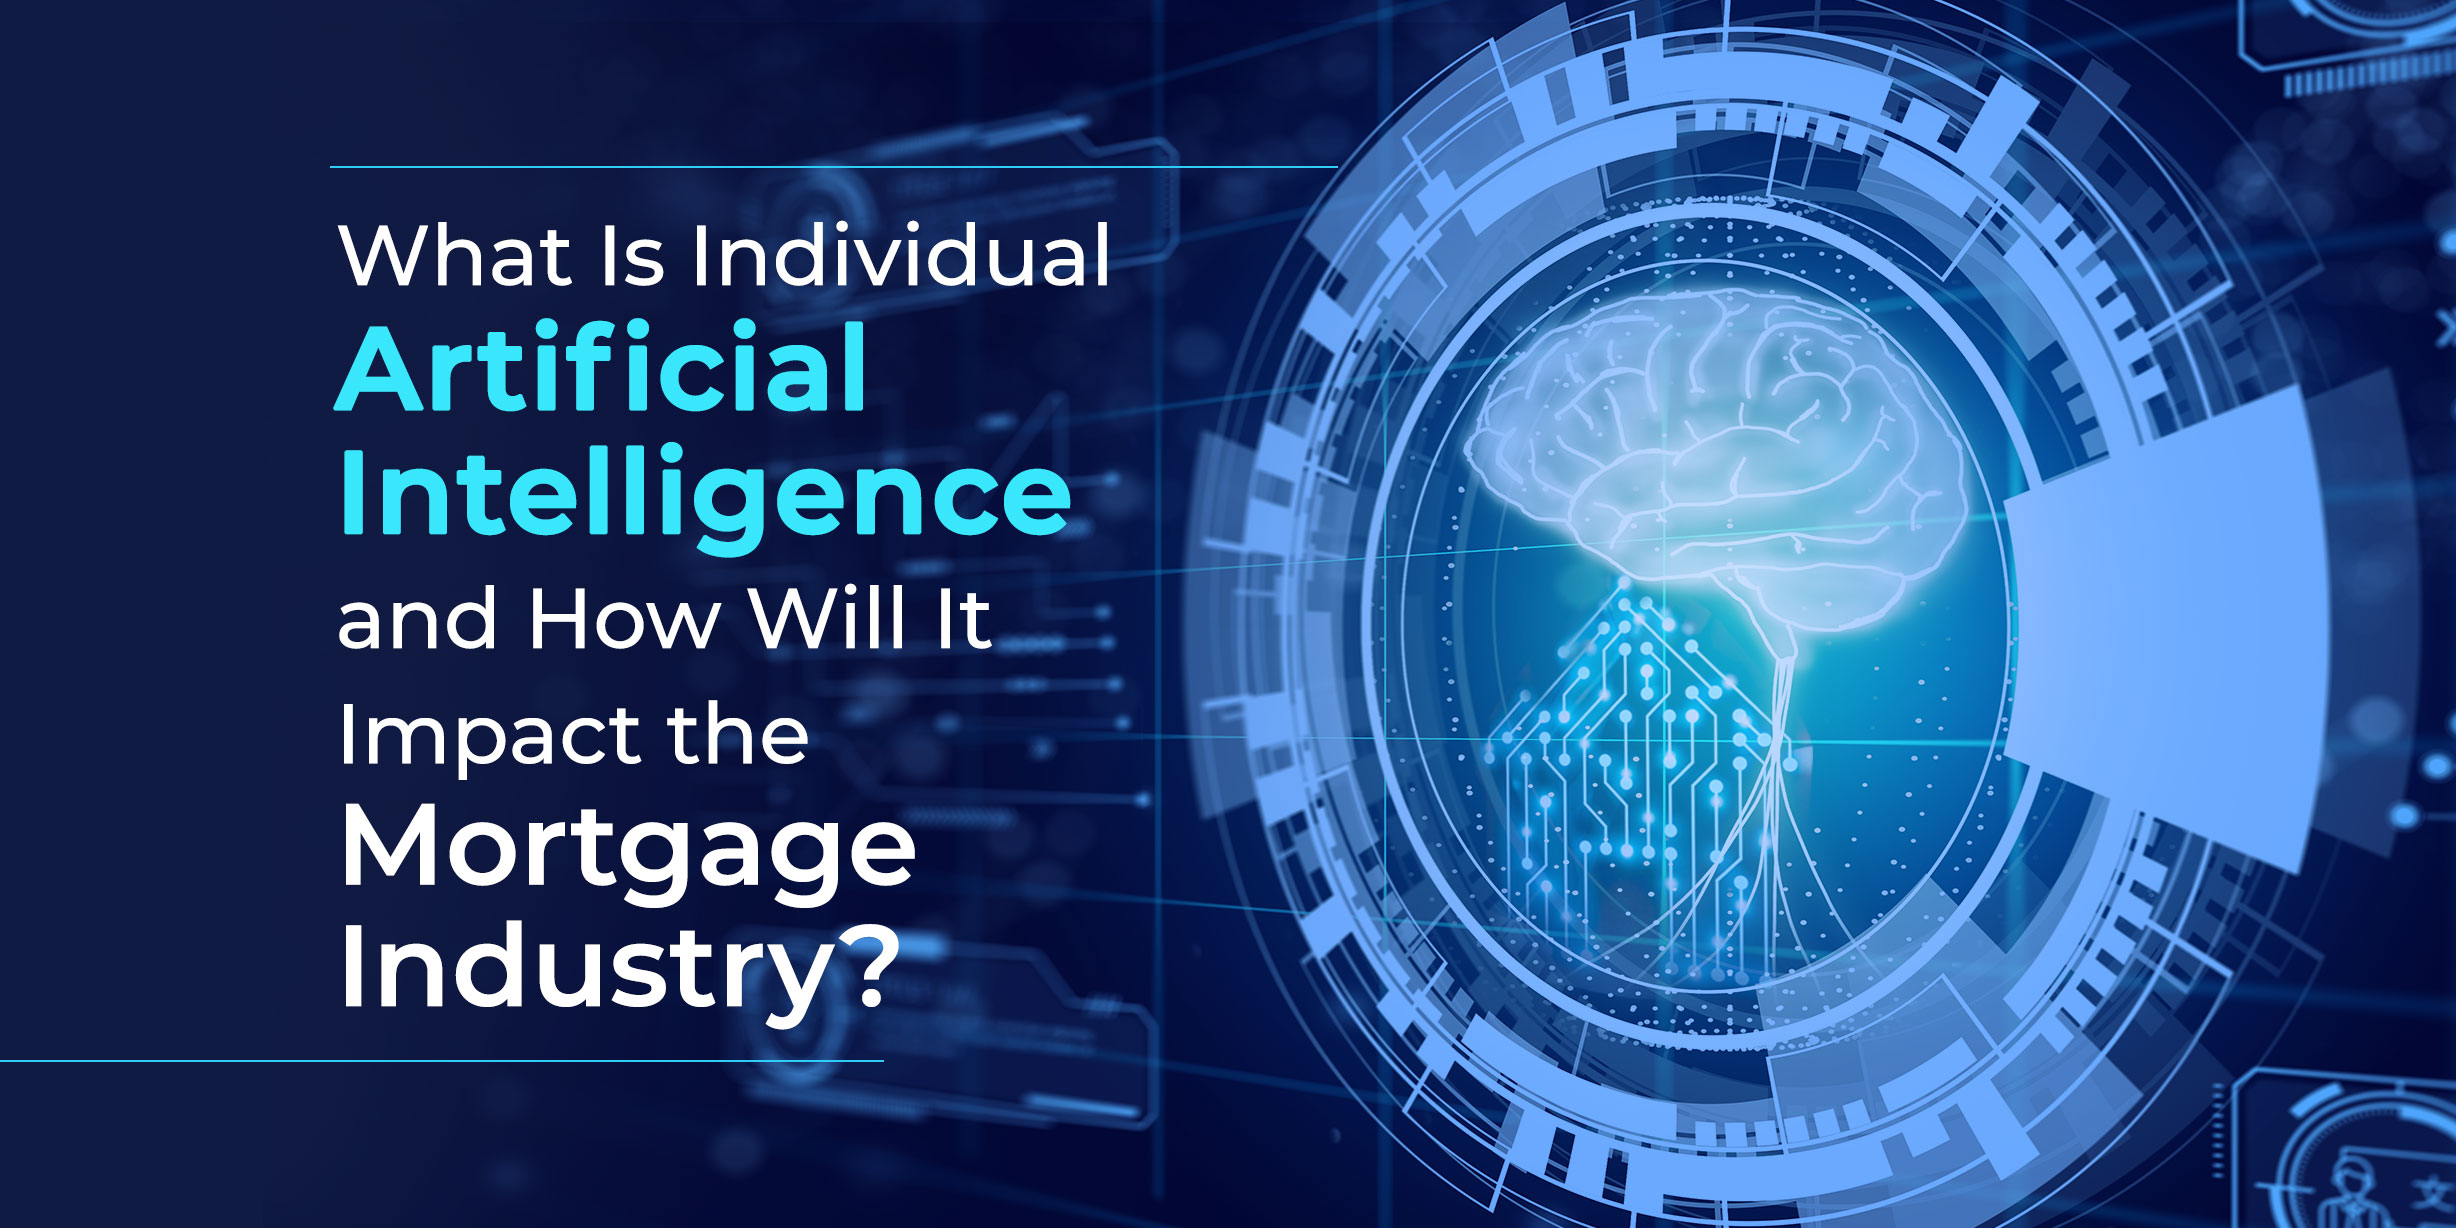 What Is Individual Artificial Intelligence and How Will It Impact the Mortgage Industry?